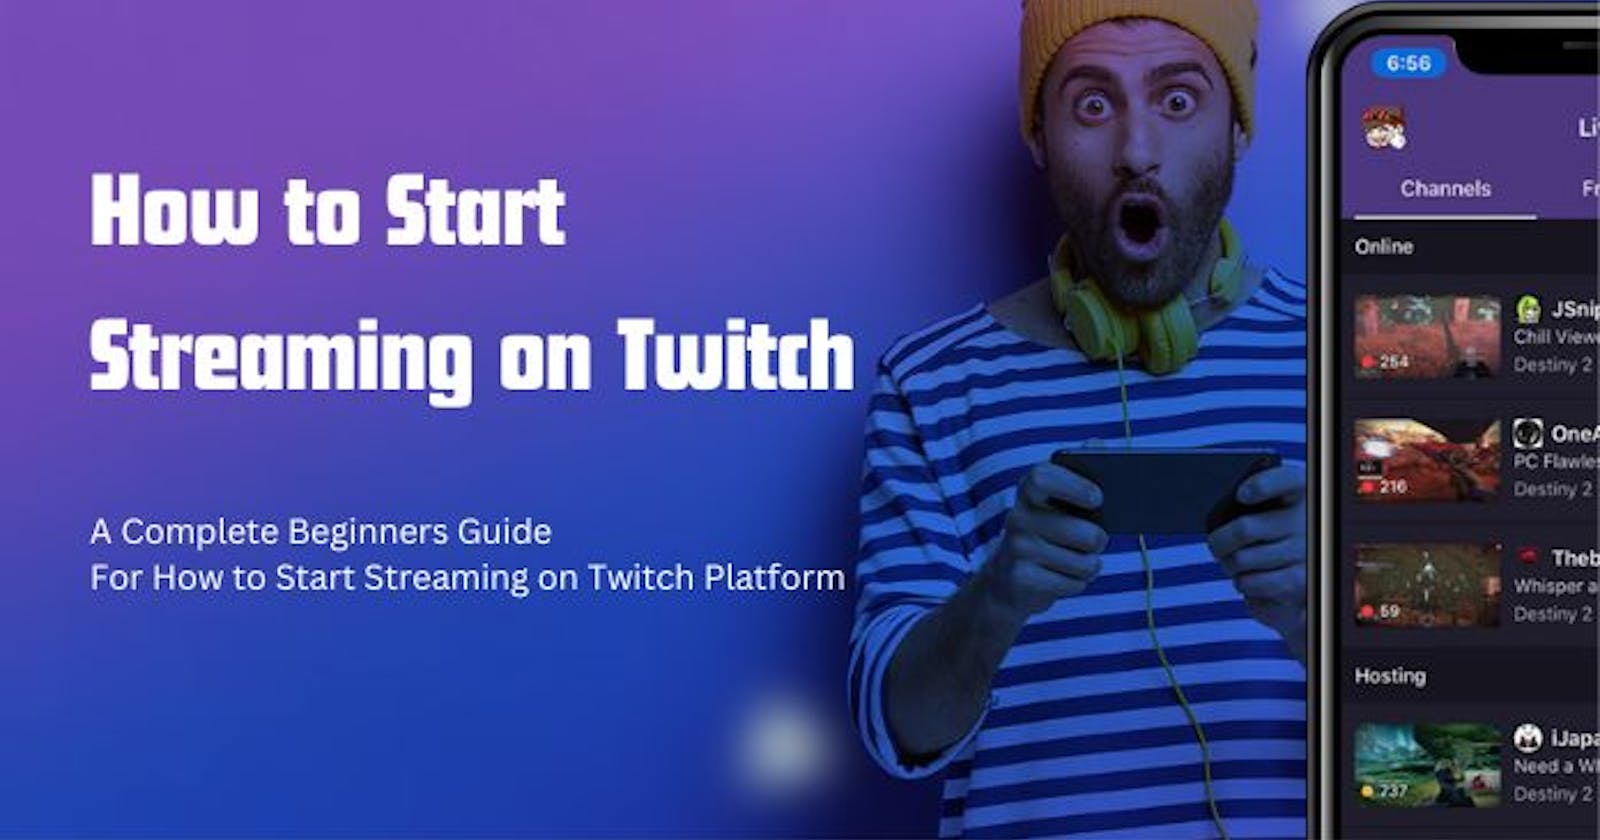 How to Start Streaming on Twitch (Beginners Guide)